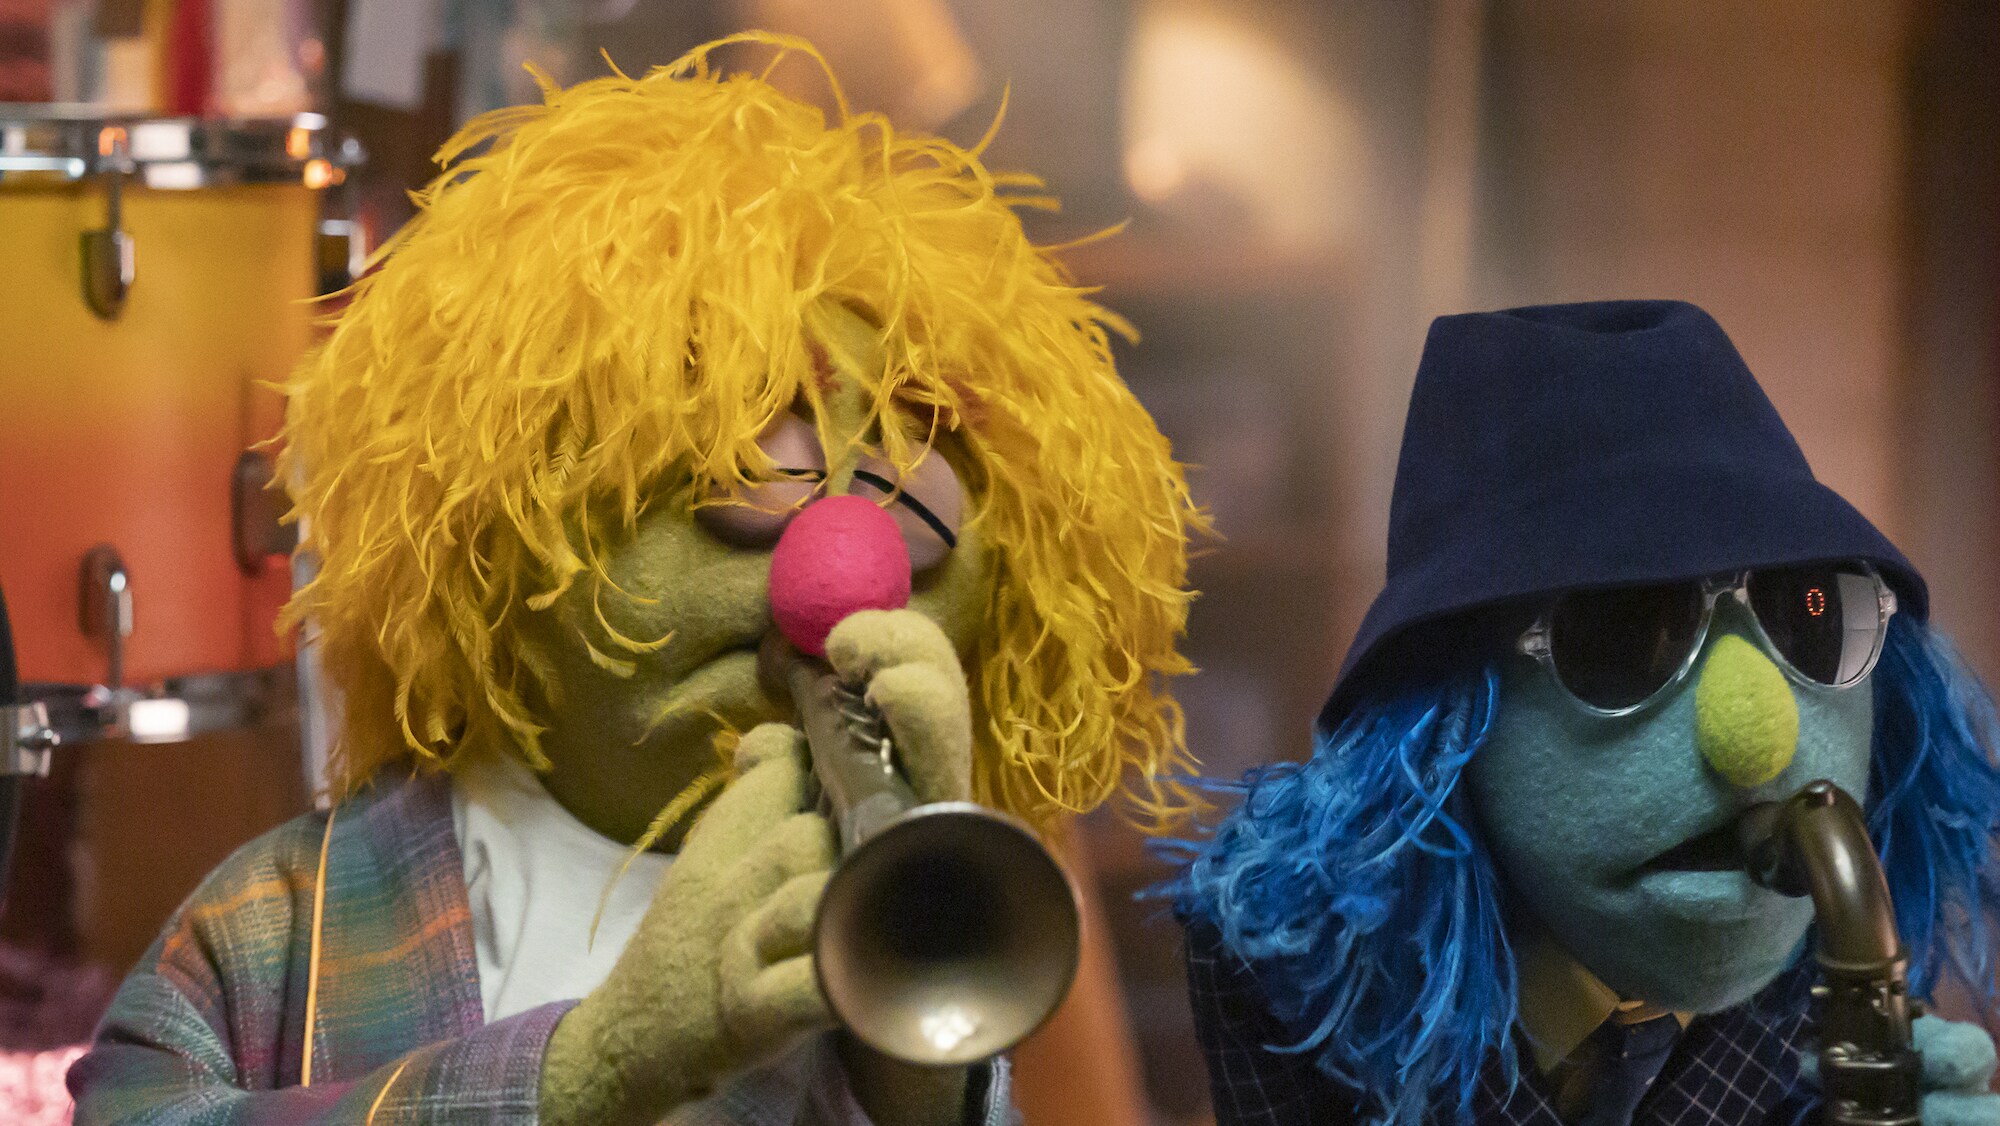 THE MUPPETS MAYHEM - “Track 4: The Times They Are A-Changin” (Disney/Mitch Haaseth) LIPS, ZOOT